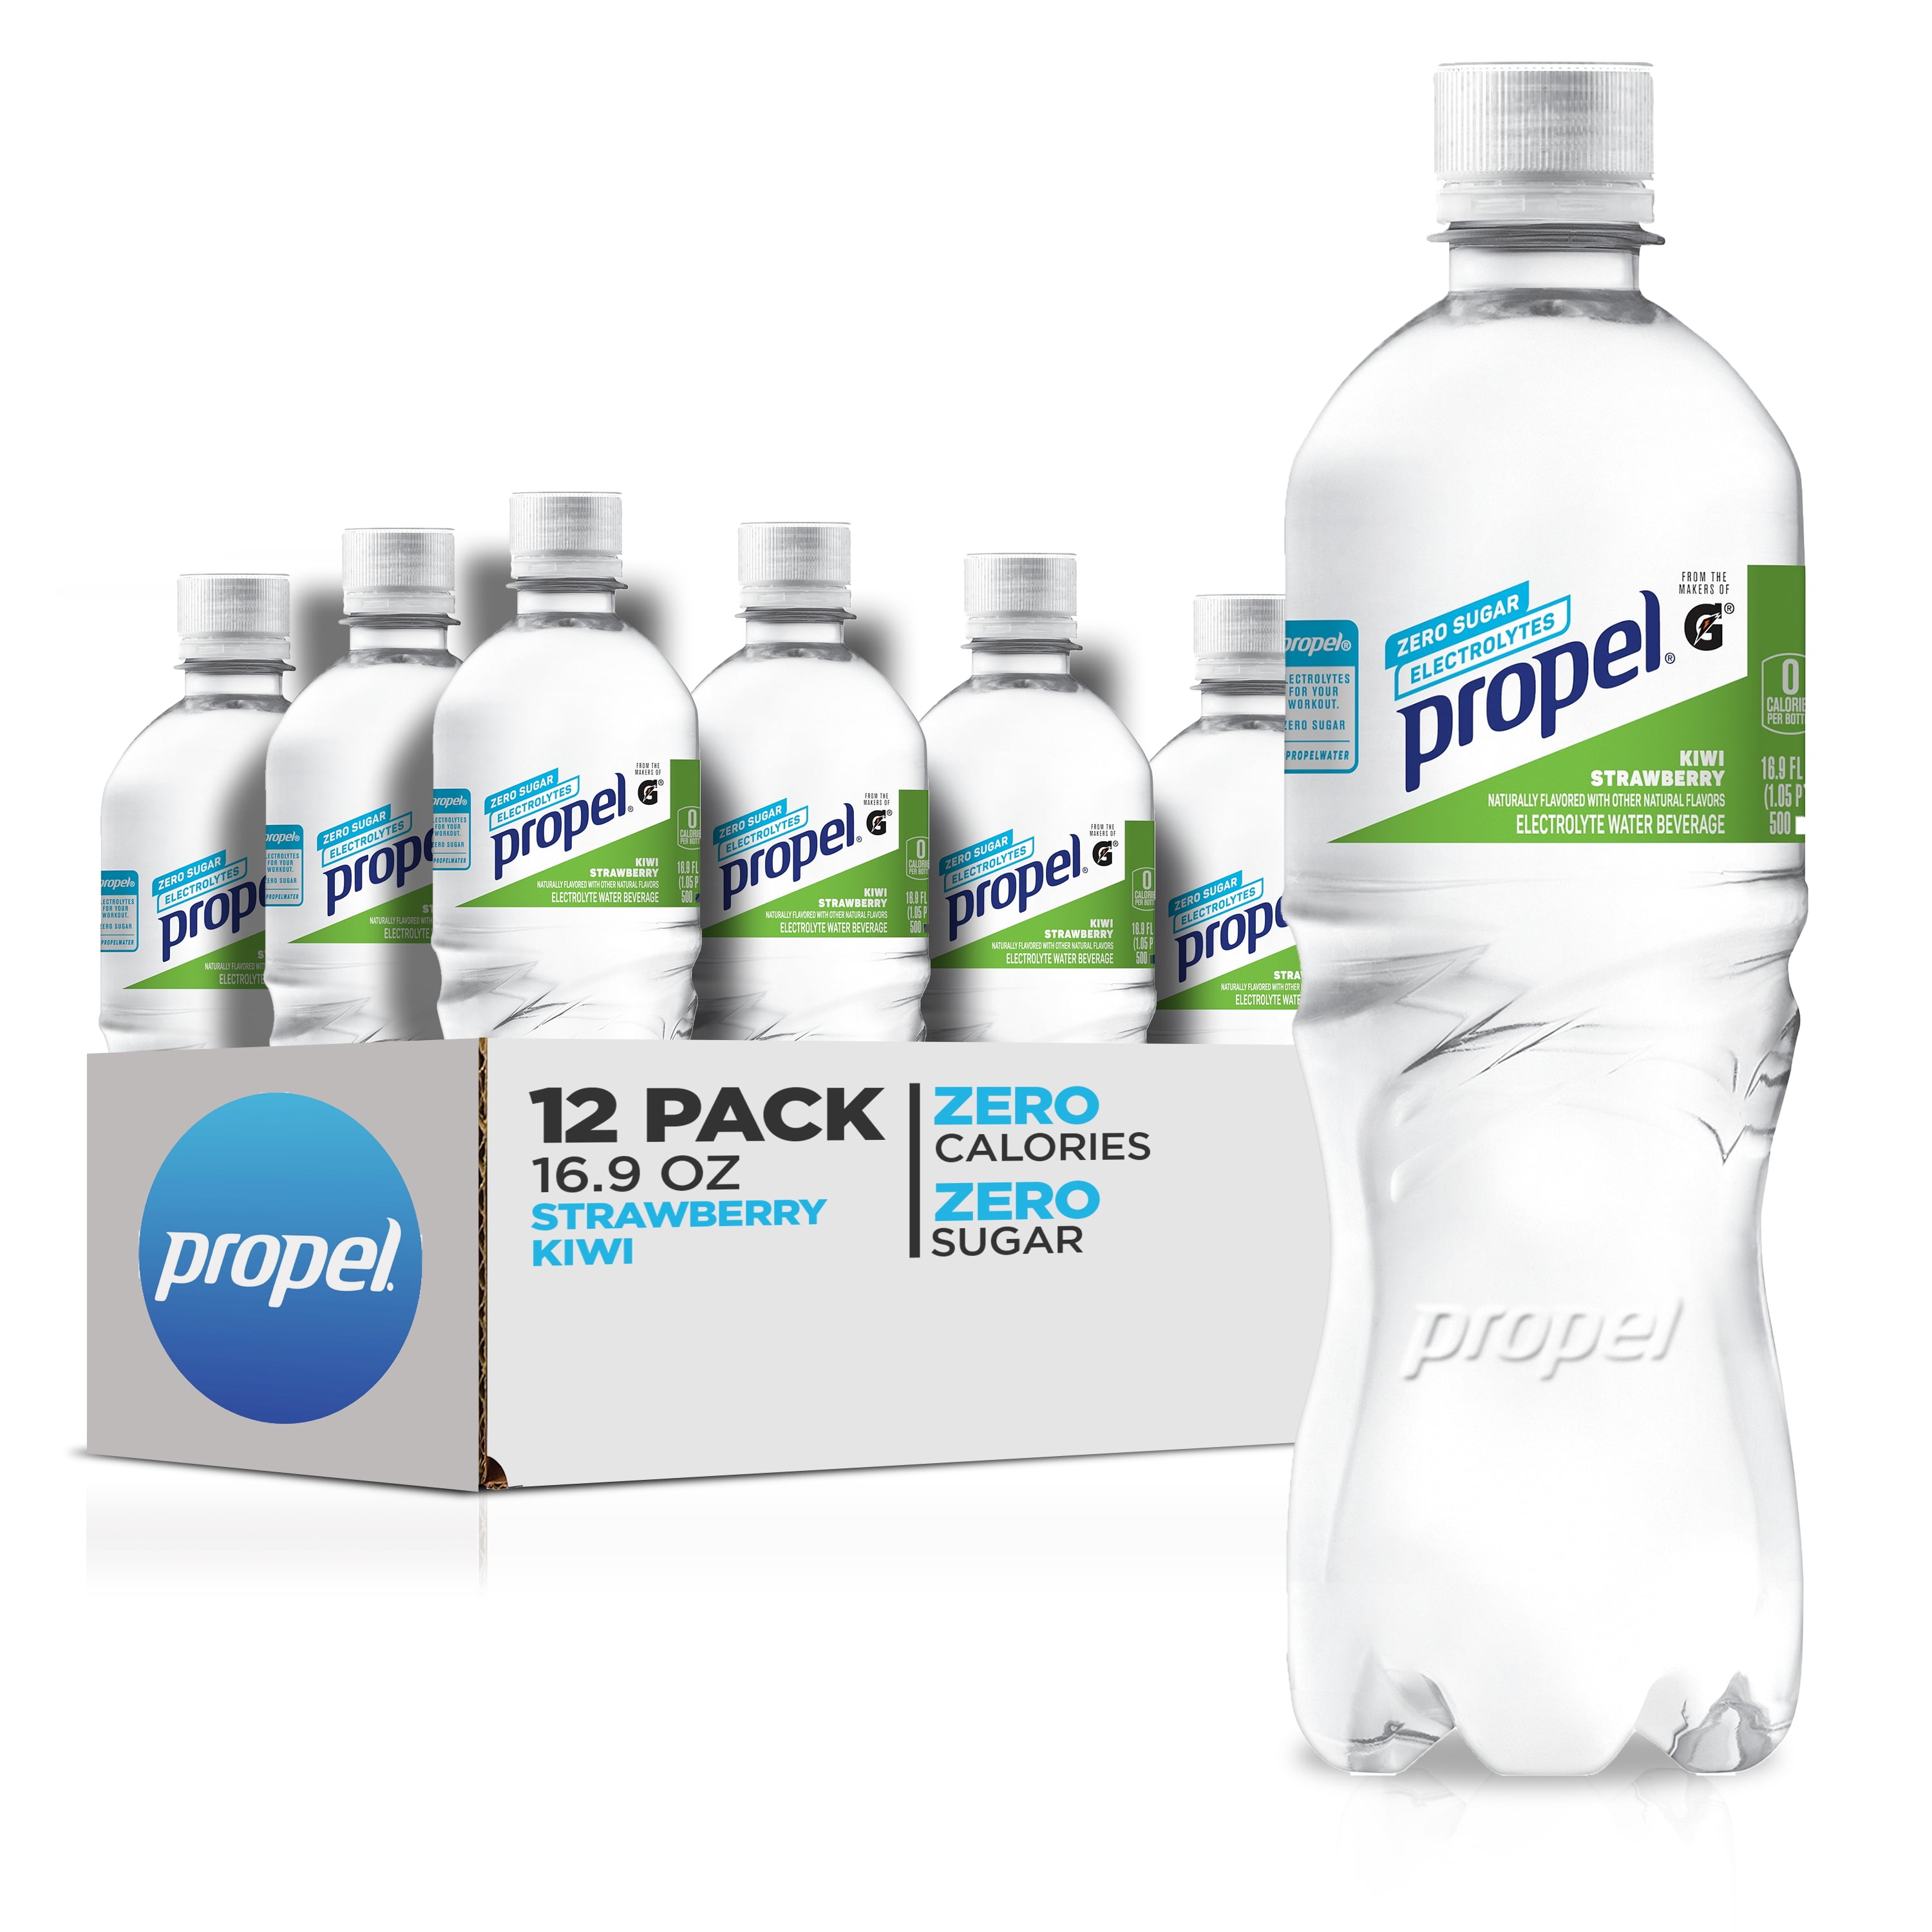 Propel Flavored Water with Electrolytes, Kiwi Strawberry, 16.9 fl oz, 12 Pack